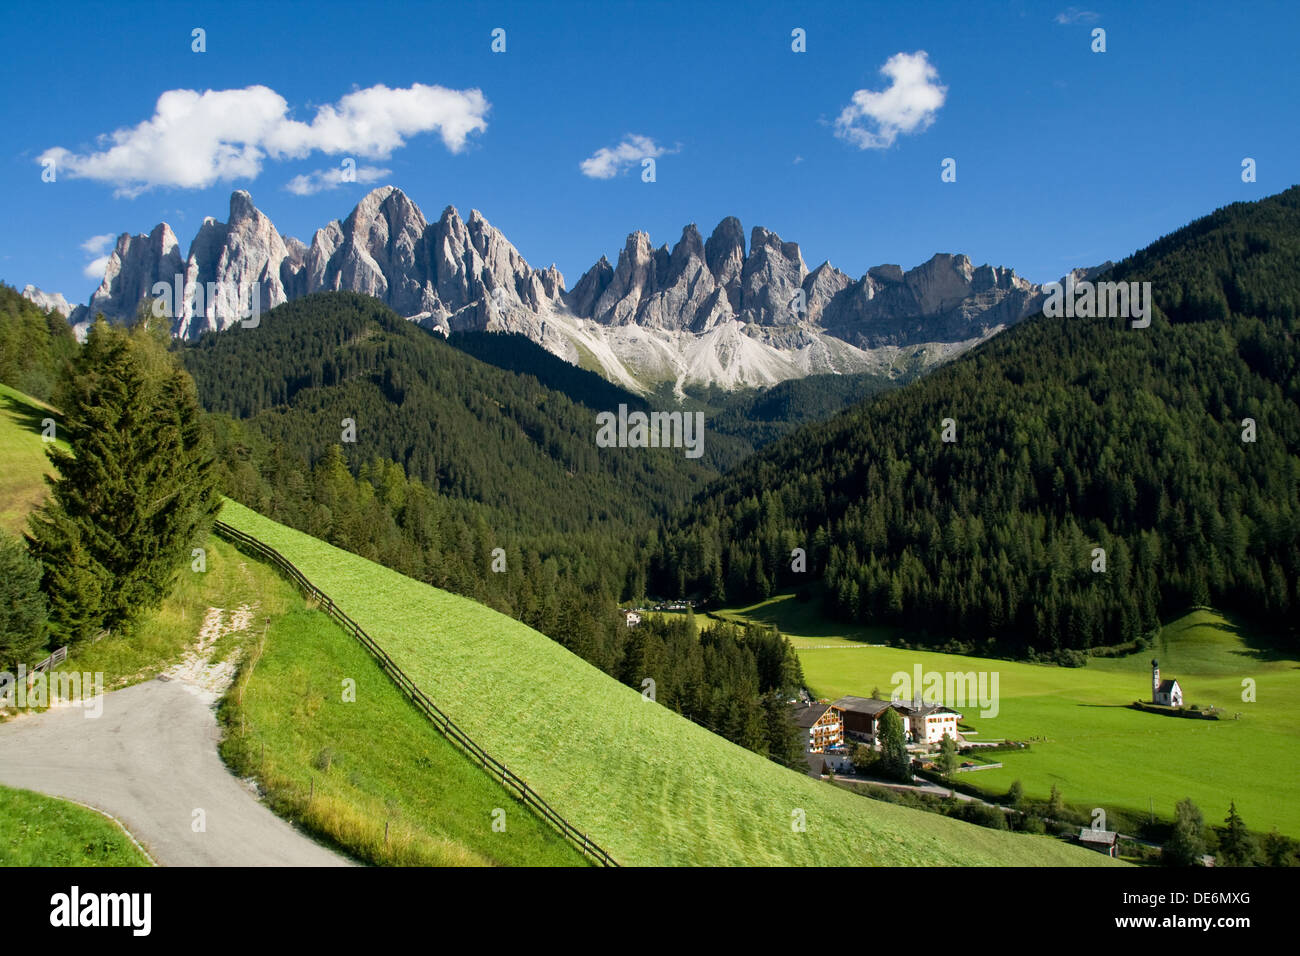 Valley of Funes (Villnoss) with the Odle mountains in the background, Dolomites, Italy. Stock Photo